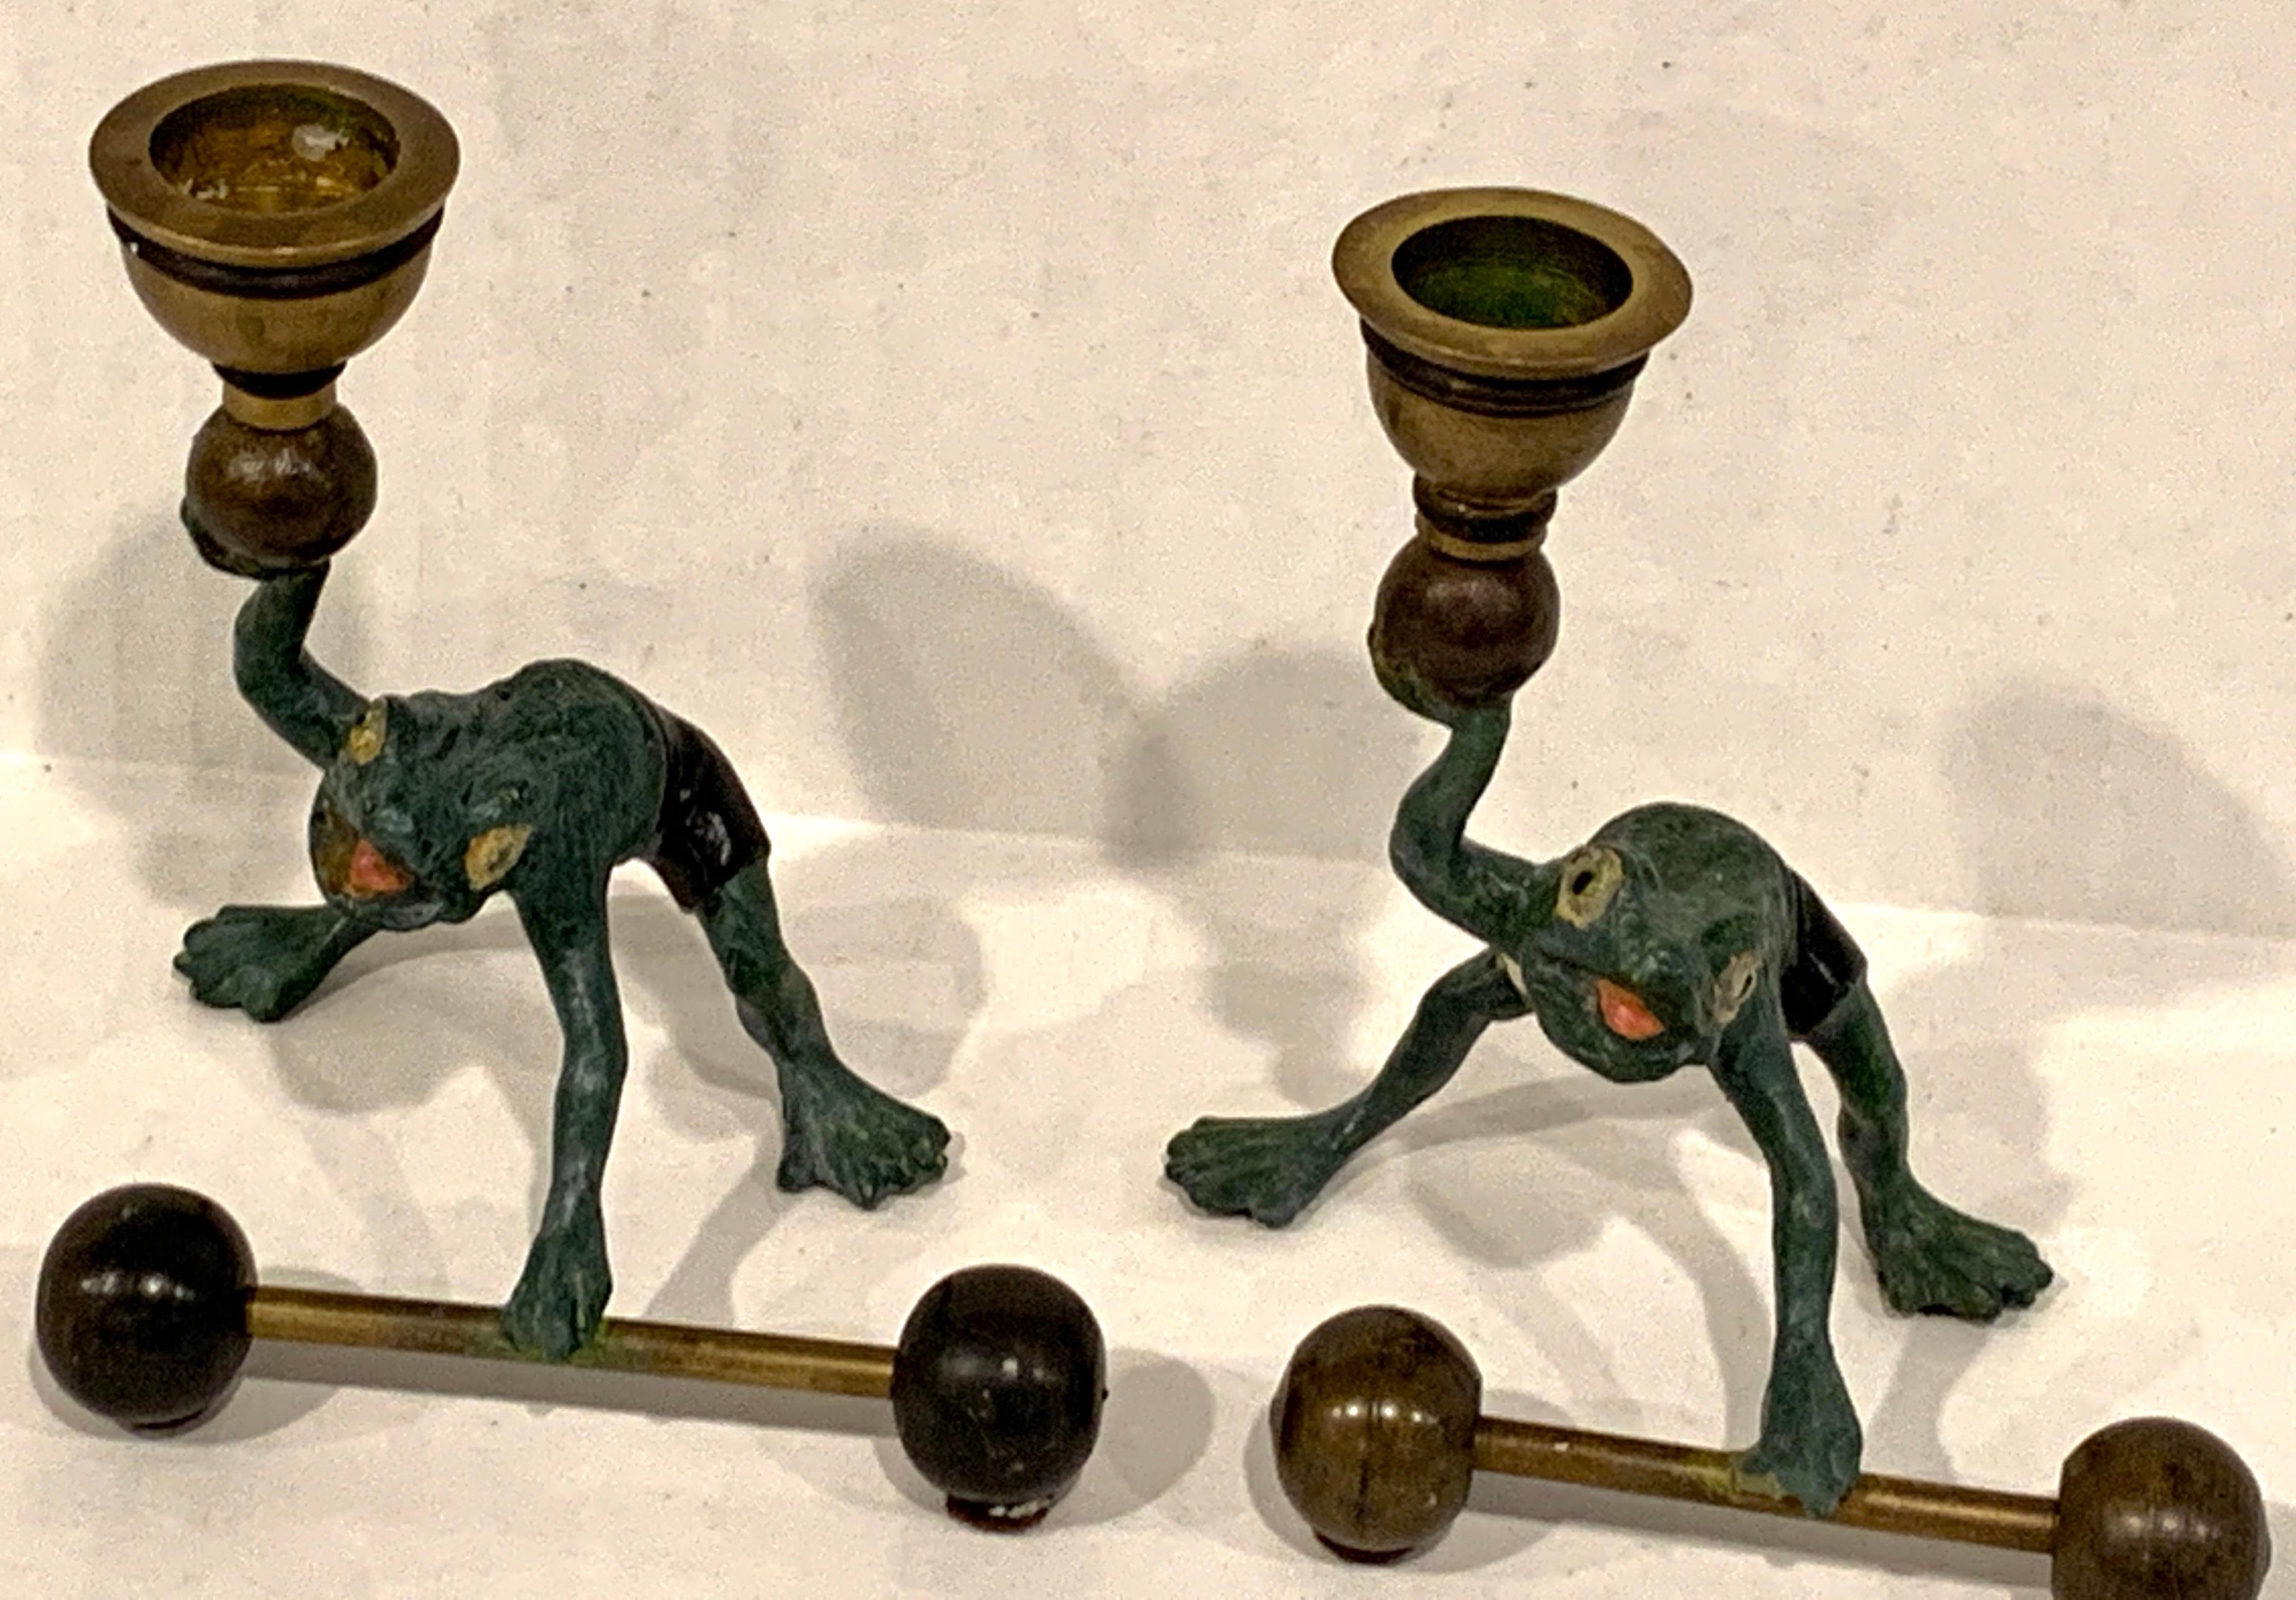 Pair of Bergman style Austrian old painted bronze weightlifting frogs, each one realistically cast and painted, dressed in black and white shorts, balancing a raised shot put and barbell. Each one holds a one standard based candle.